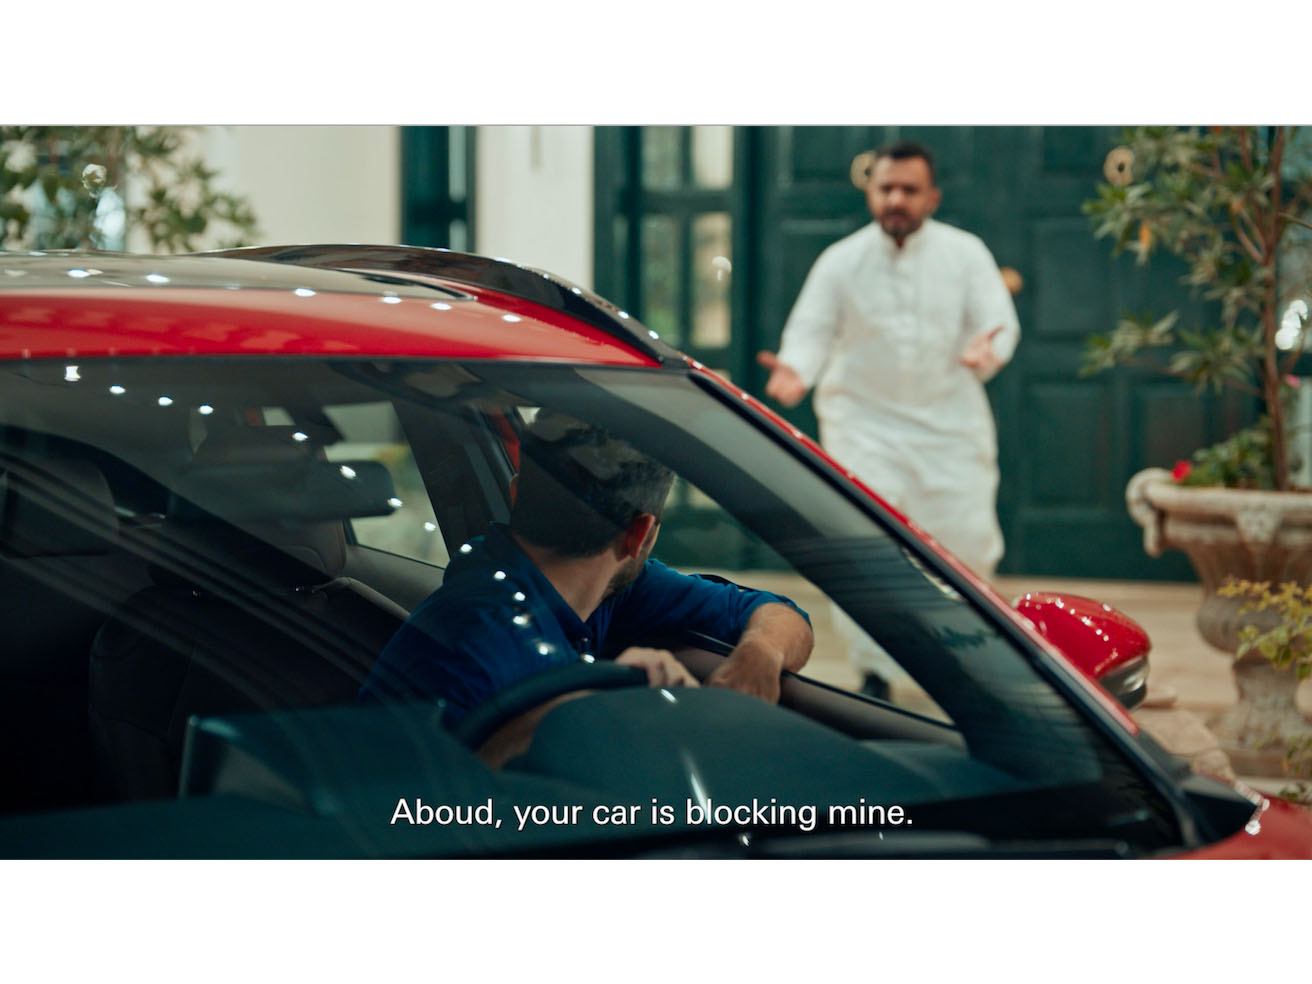 Serviceplan Experience rolls out a lighthearted film for Abdul Latif Jameel Motors capturing the true dynamics of Ramadan